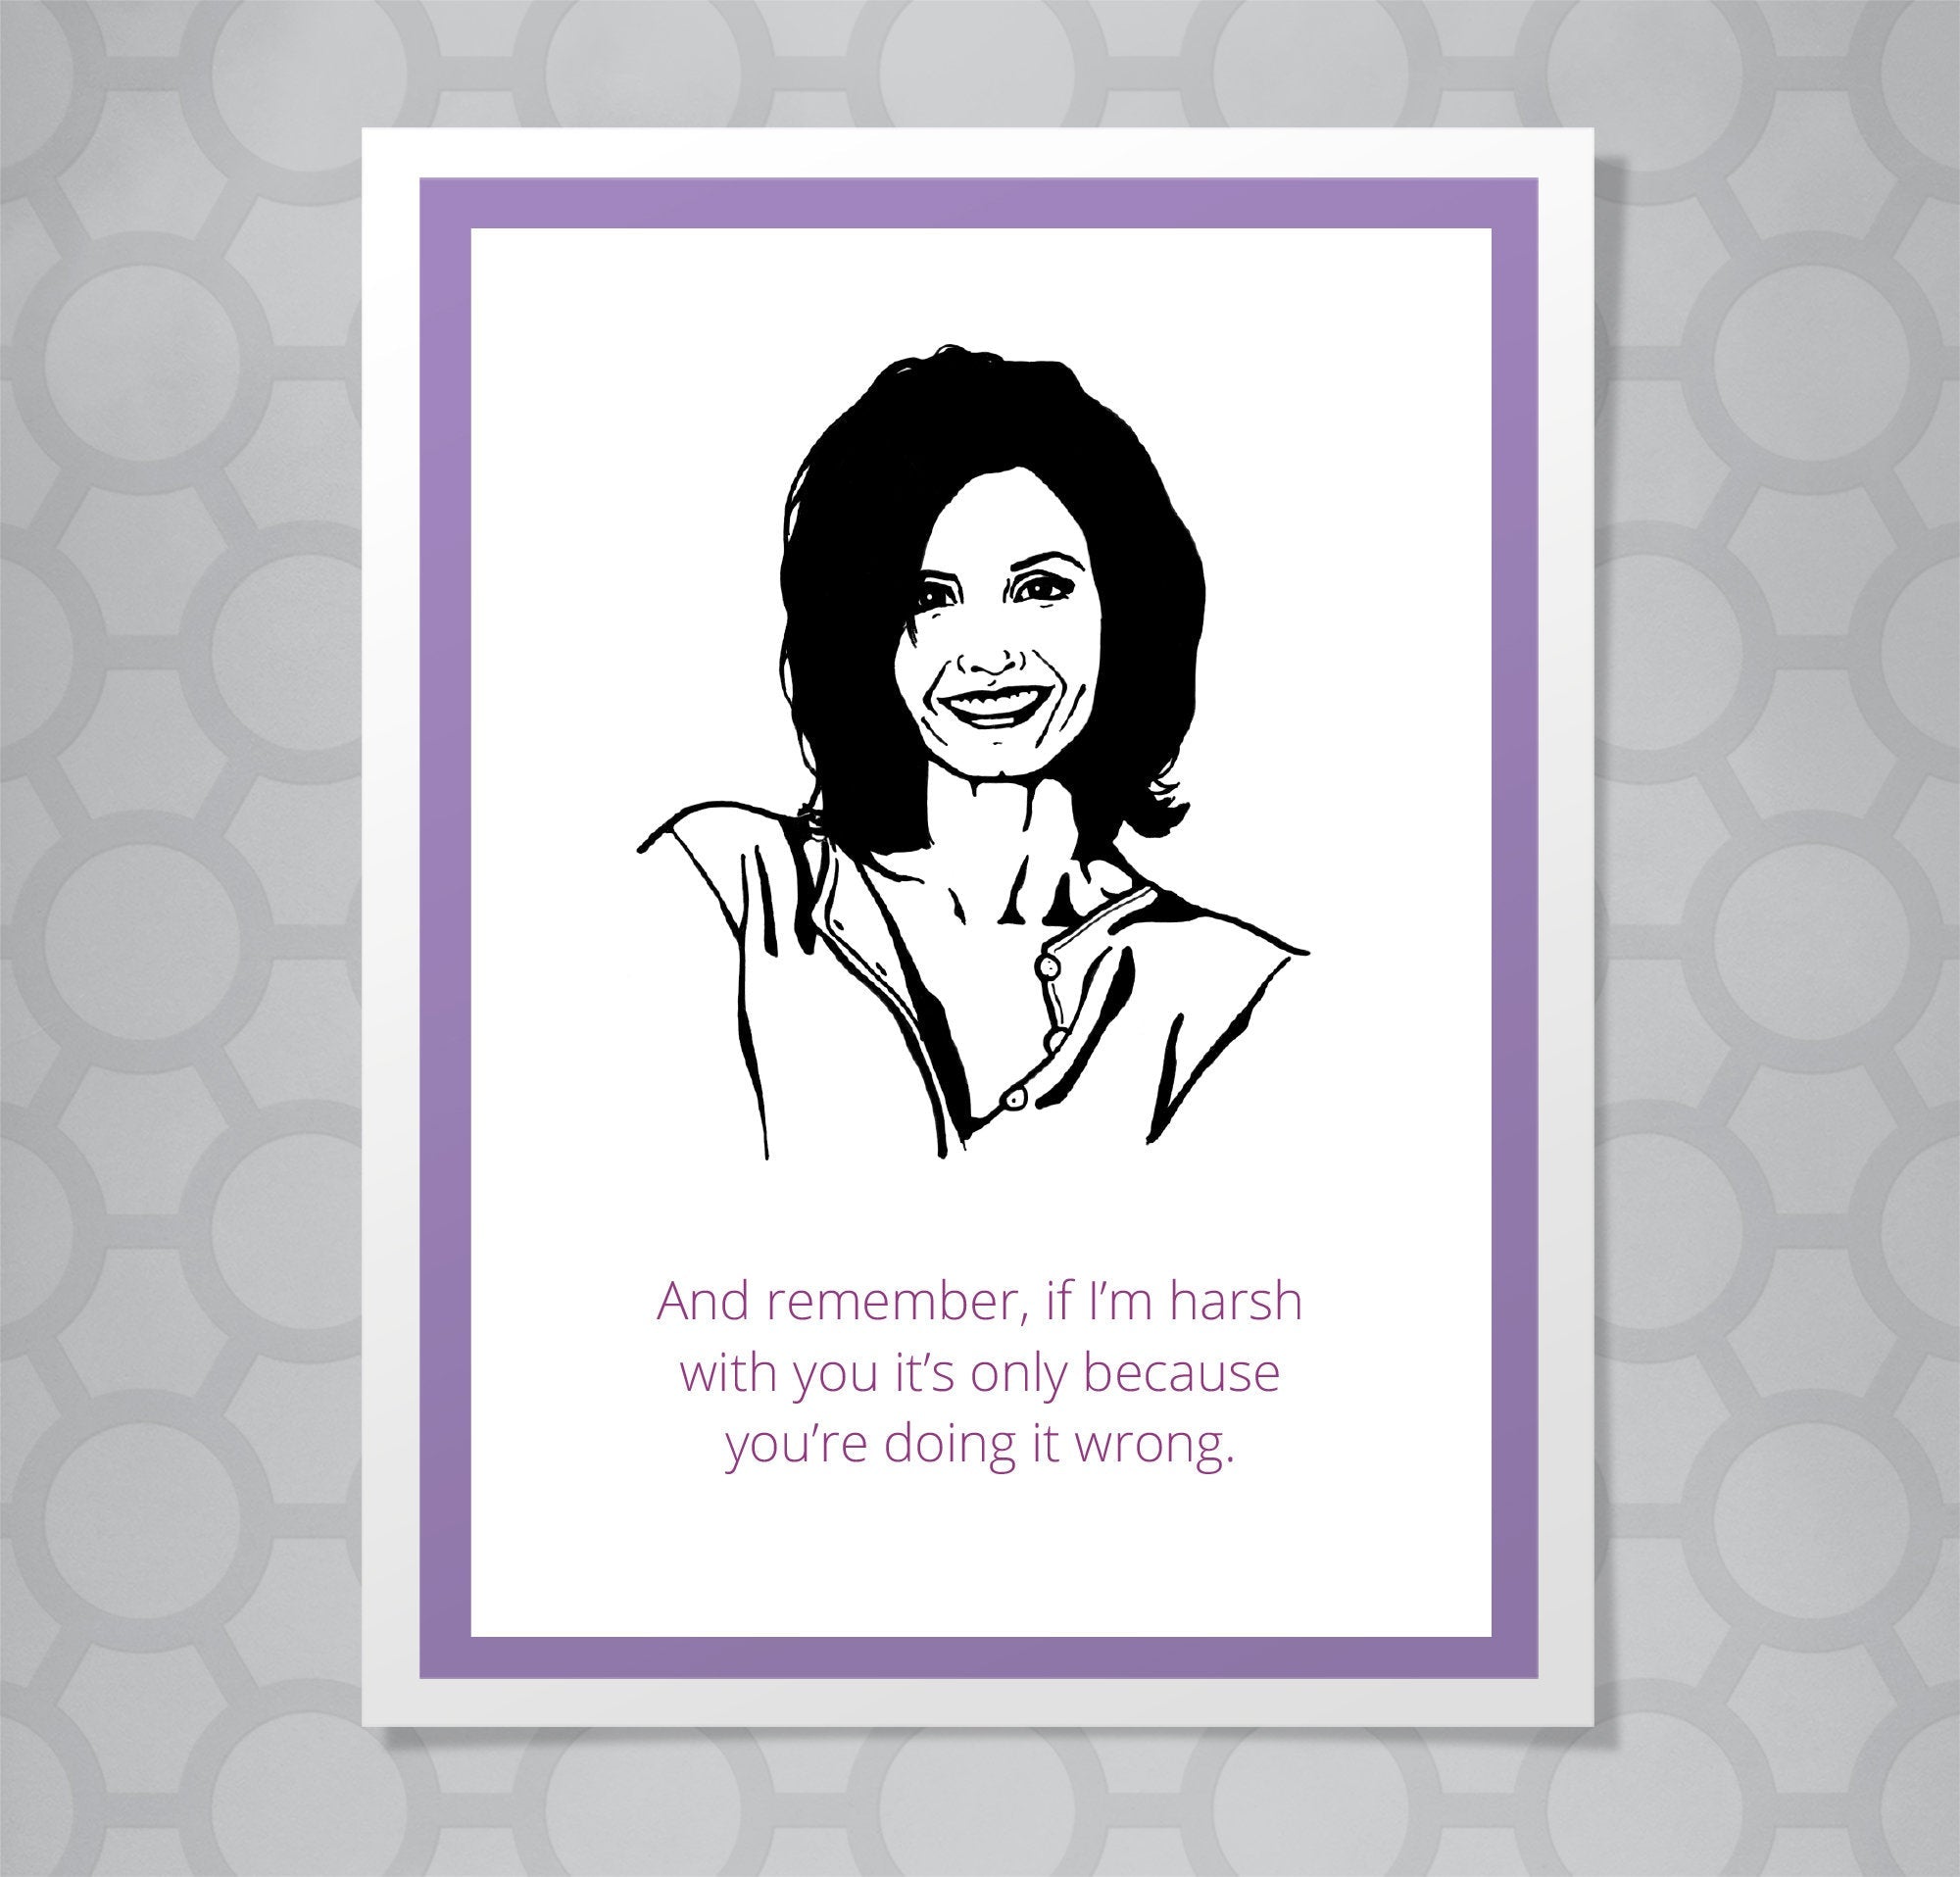 Greeting card with illustration of Friends Monica. Caption says "And remember, if I'm harsh with you, it's only because you're doing it wrong."